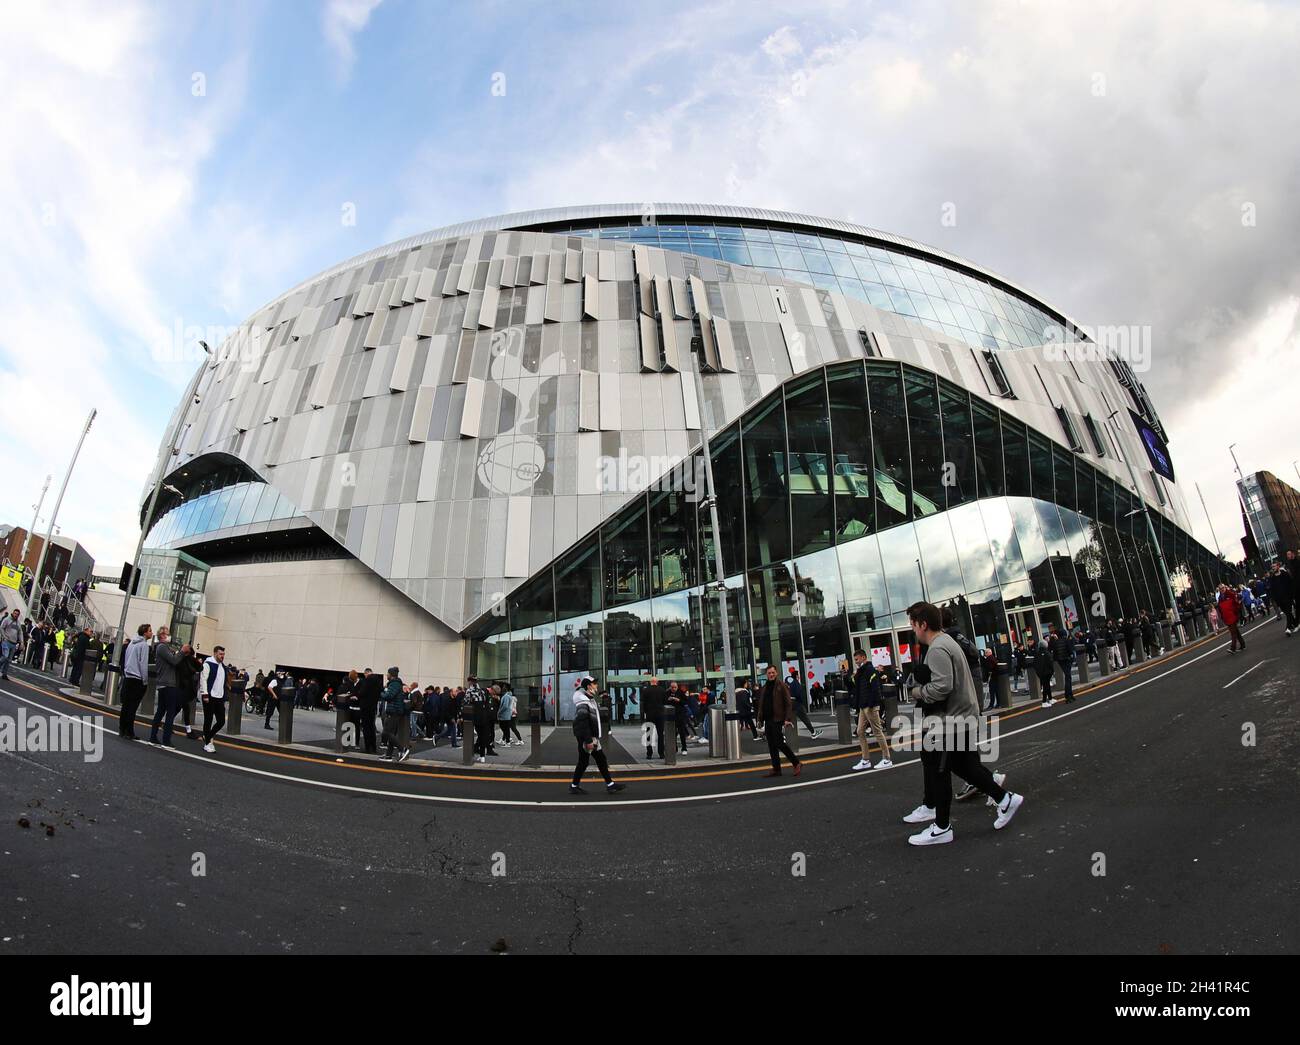 LONDON, ENGLAND - OCTOBER 30: General view of the stadium before the Premier League match between Tottenham Hotspur and Manchester United at Tottenham Hotspur Stadium on October 30, 2021 in London, England. (Photo by MB Media) Stock Photo